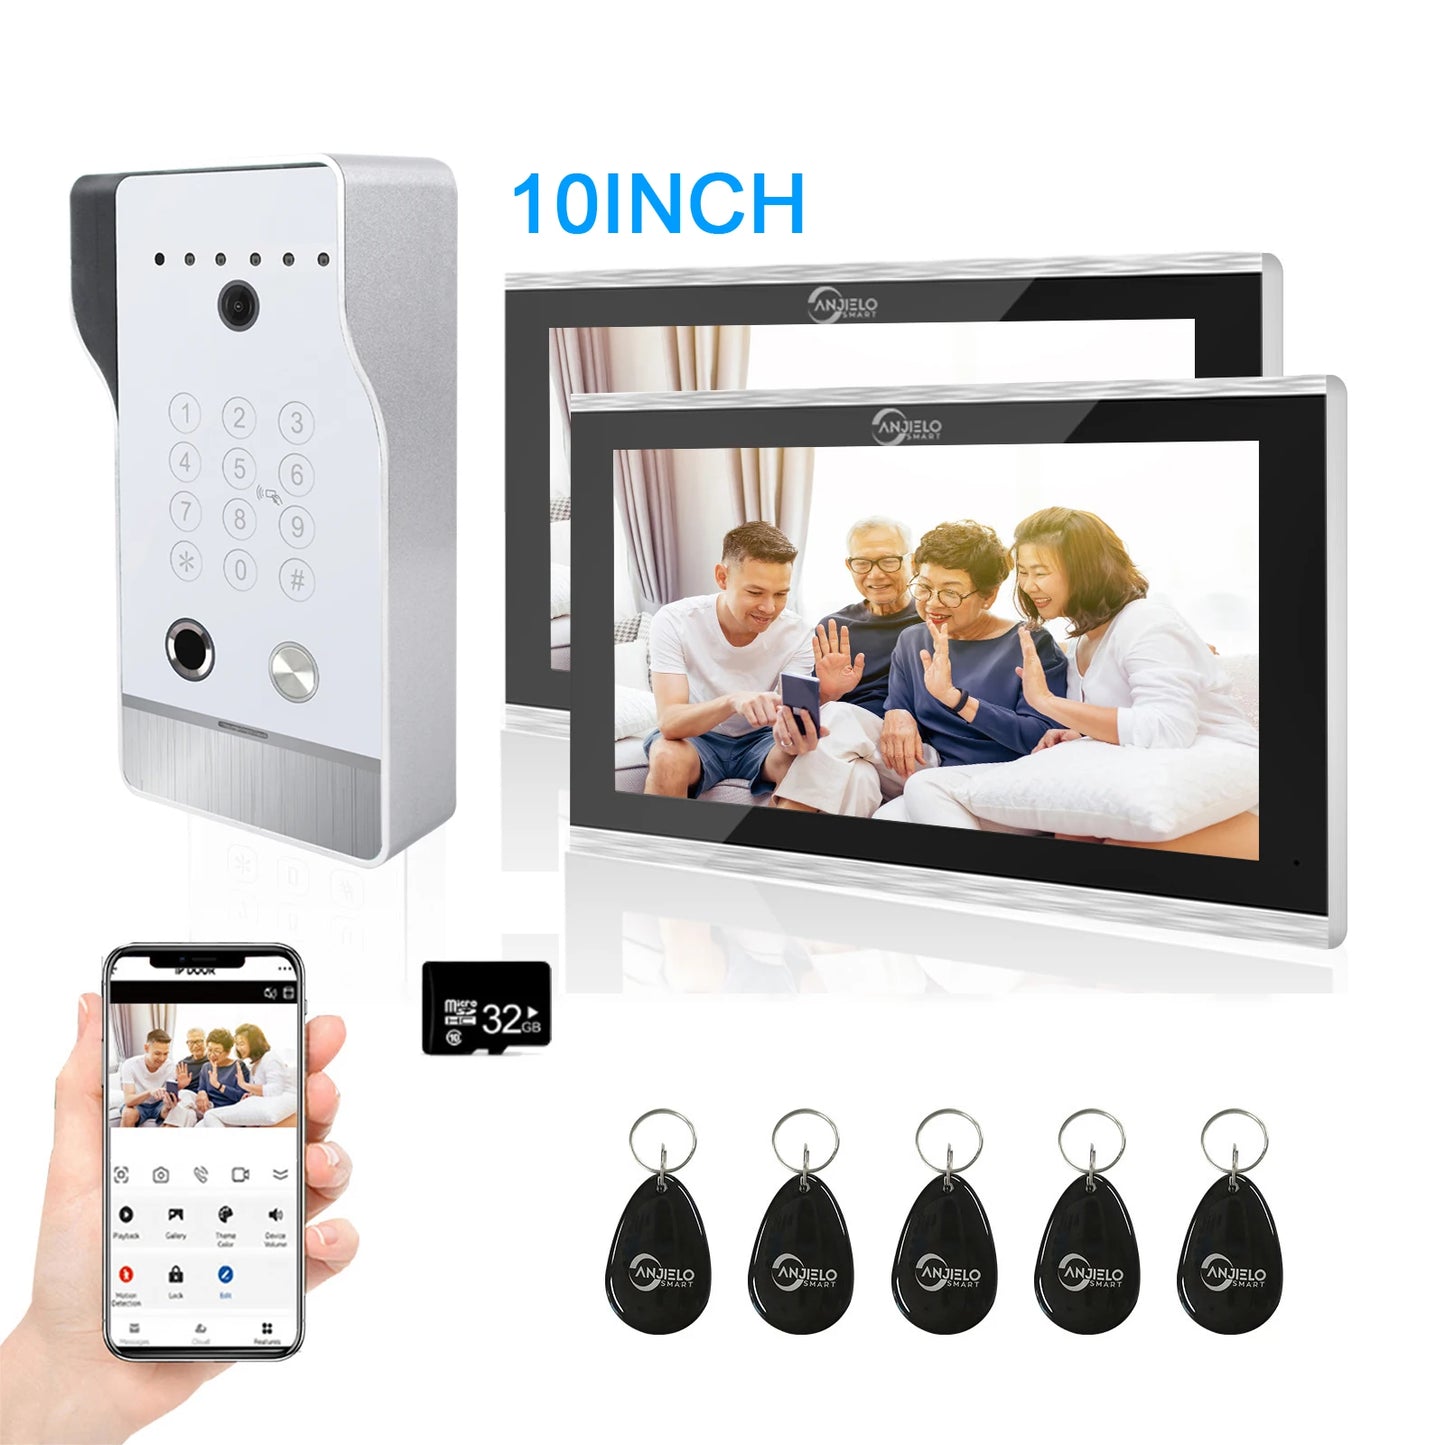 NEW 2023 Large Size FHD 1080P Tuya Smart WiF Video Door phone Doorbell Camera with RFID Card unlcok Fingerprint and Passcode unlock for the Apartment Intercom System for Home Villa